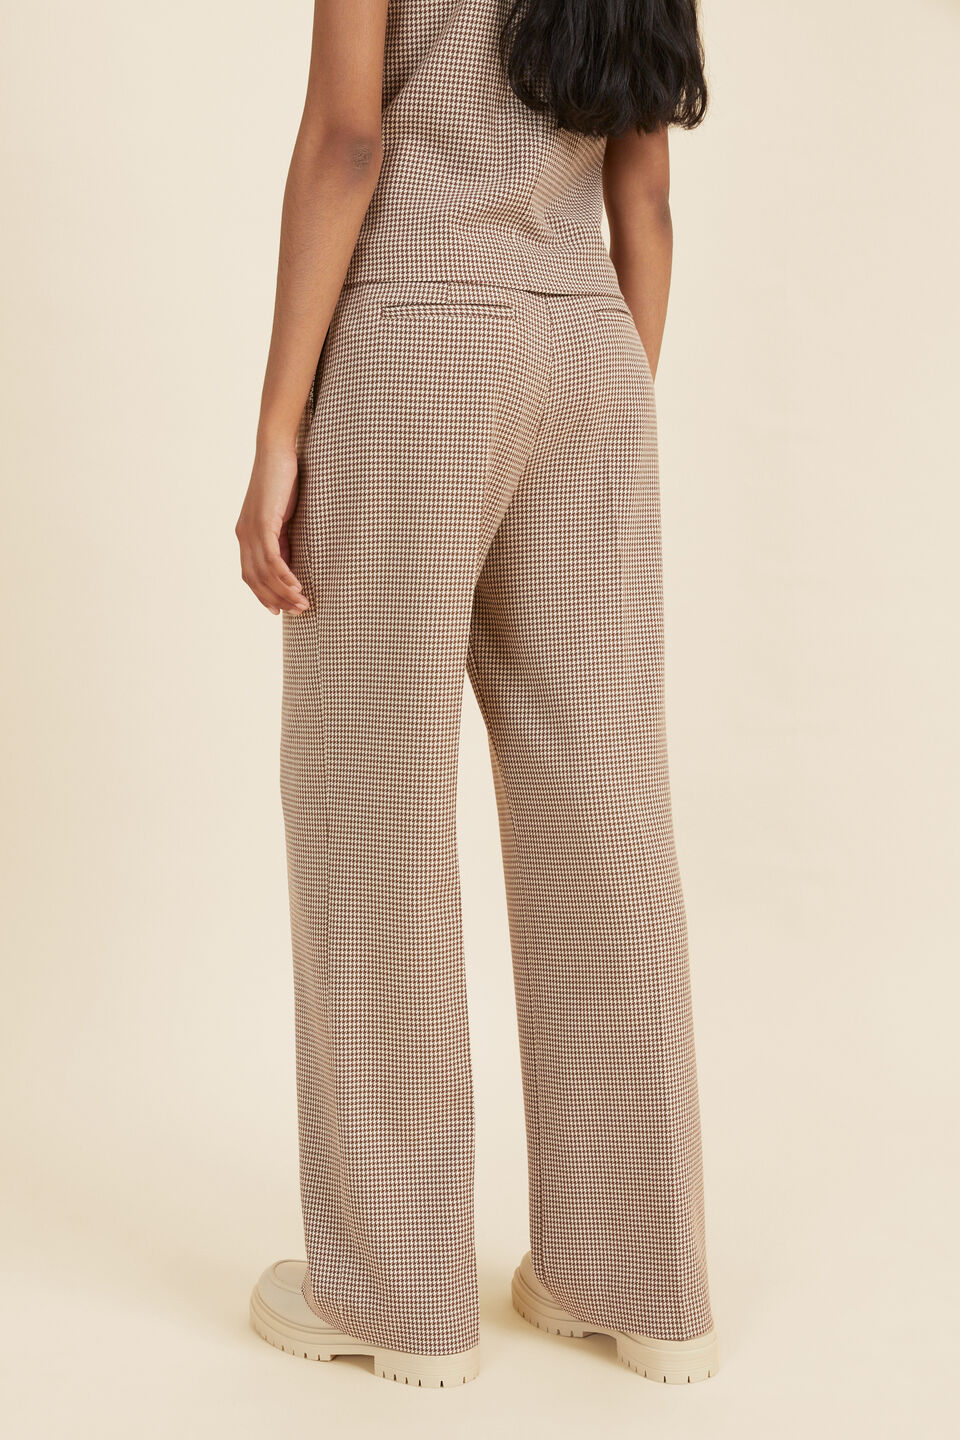 Houndstooth Suit Pant  Coconut Houndstooth